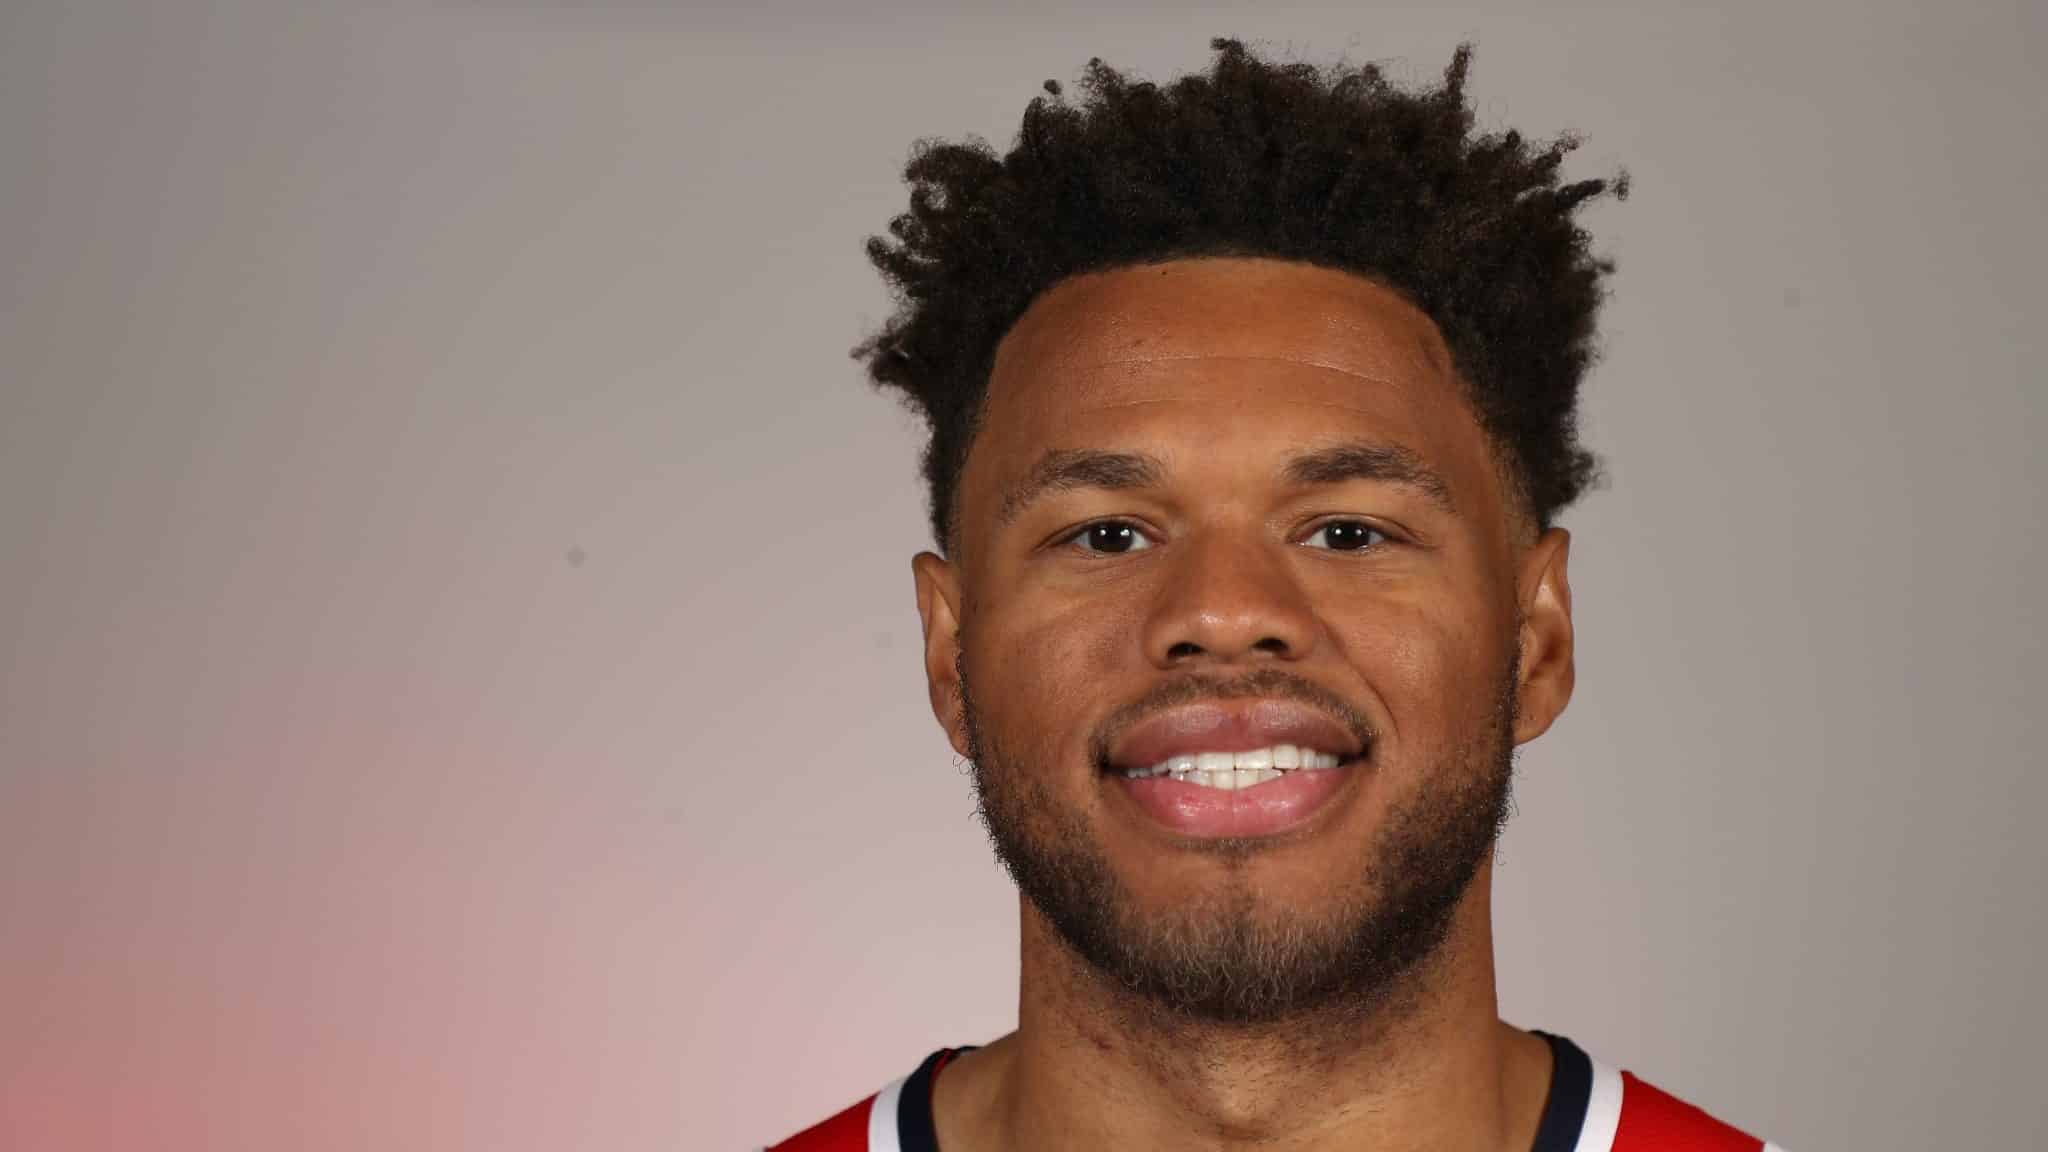 WASHINGTON, DC - SEPTEMBER 30: Justin Anderson #7 of the Washington Wizards poses during media day at Medstar Wizards Performance Center on September 30, 2019 in Washington, DC. NOTE TO USER: User expressly acknowledges and agrees that, by downloading and/or using this photograph, user is consenting to the terms and conditions of the Getty Images License Agreement.